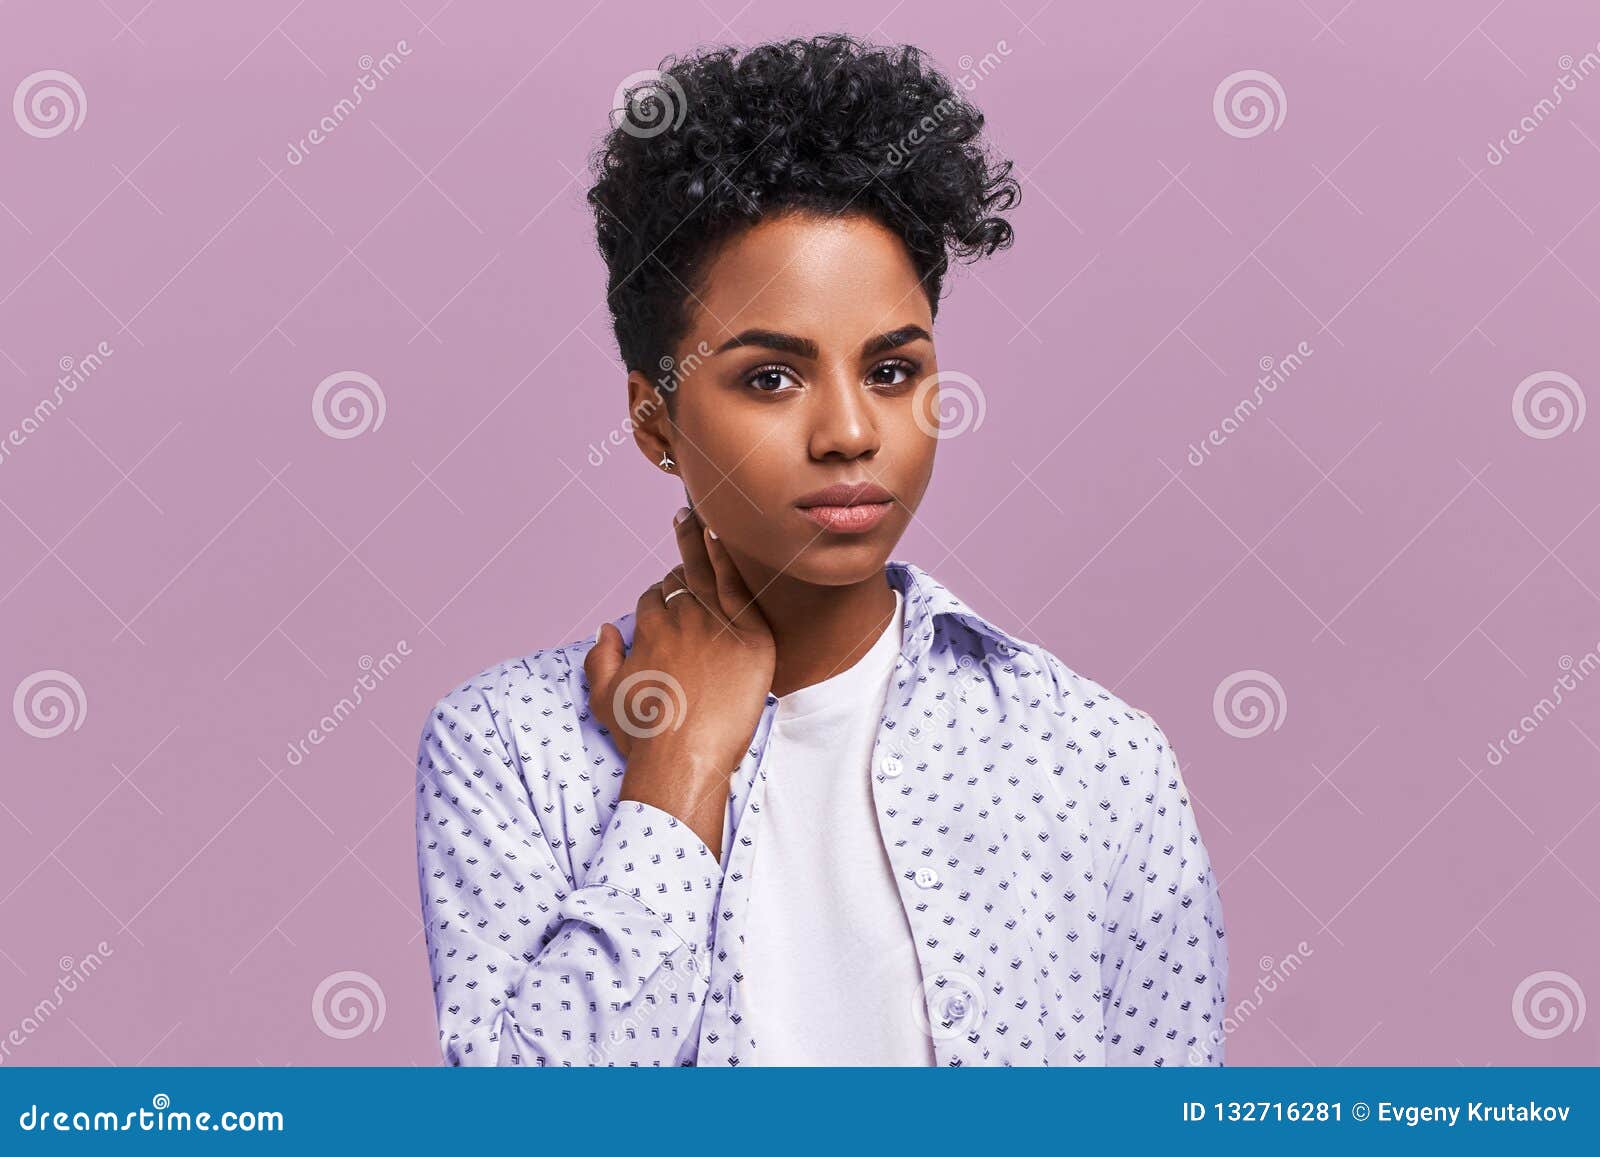 Premium Photo  Photo of confident woman has bushy afro hairstyle points  both index fingers above dressed in white jumper stands against brown  background advertises some item shows direction come upstairs